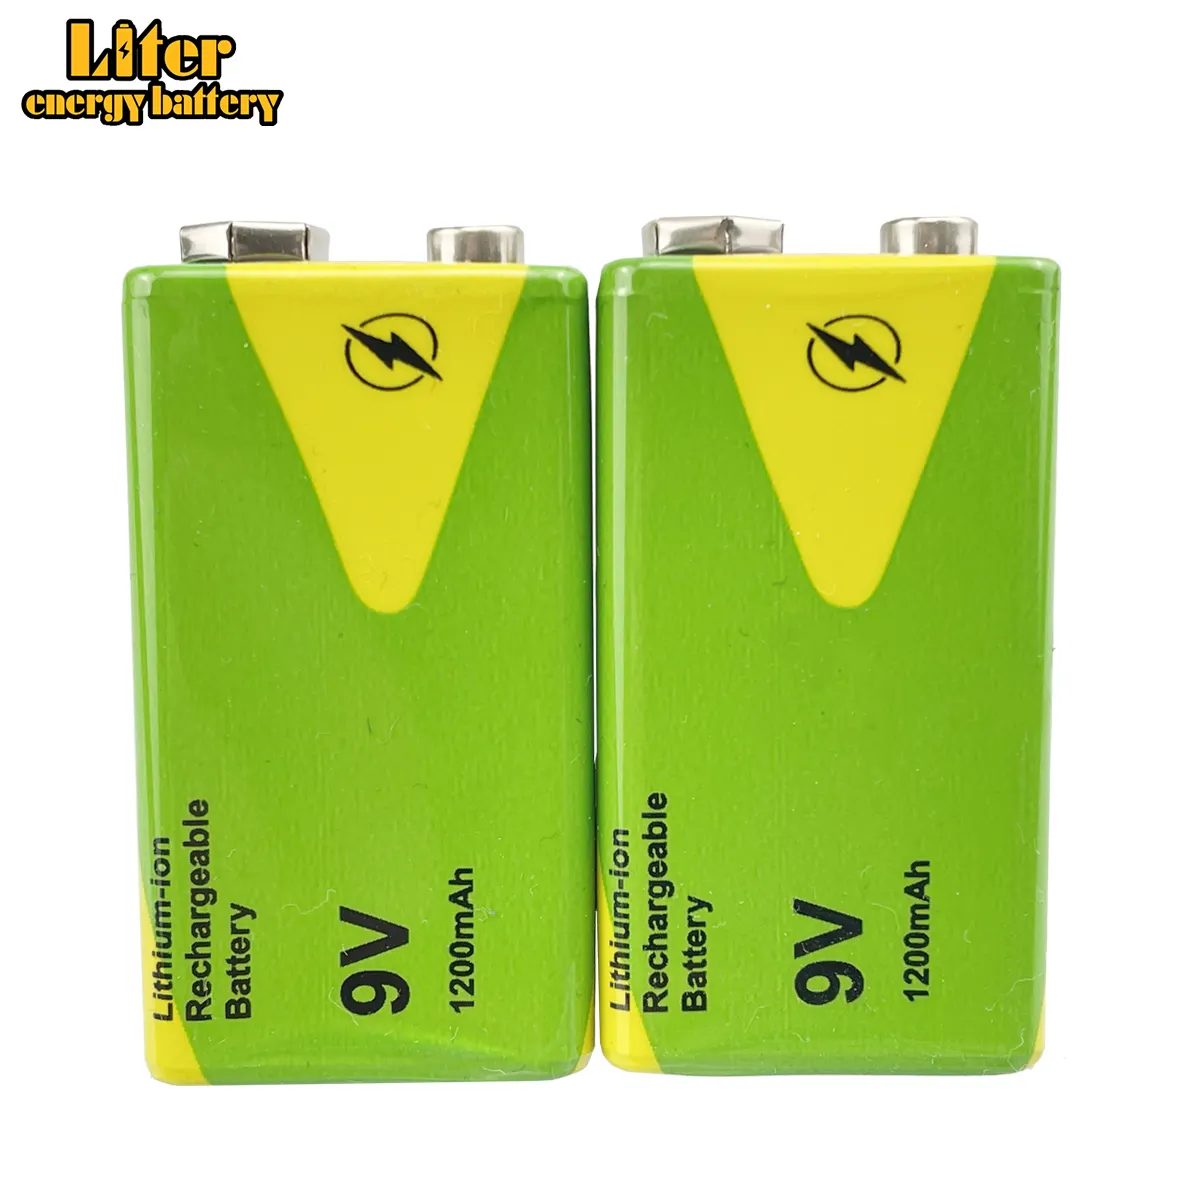 9v lithium polymer battery non rechargeable 1200mah cr9v dry cell lipo battery